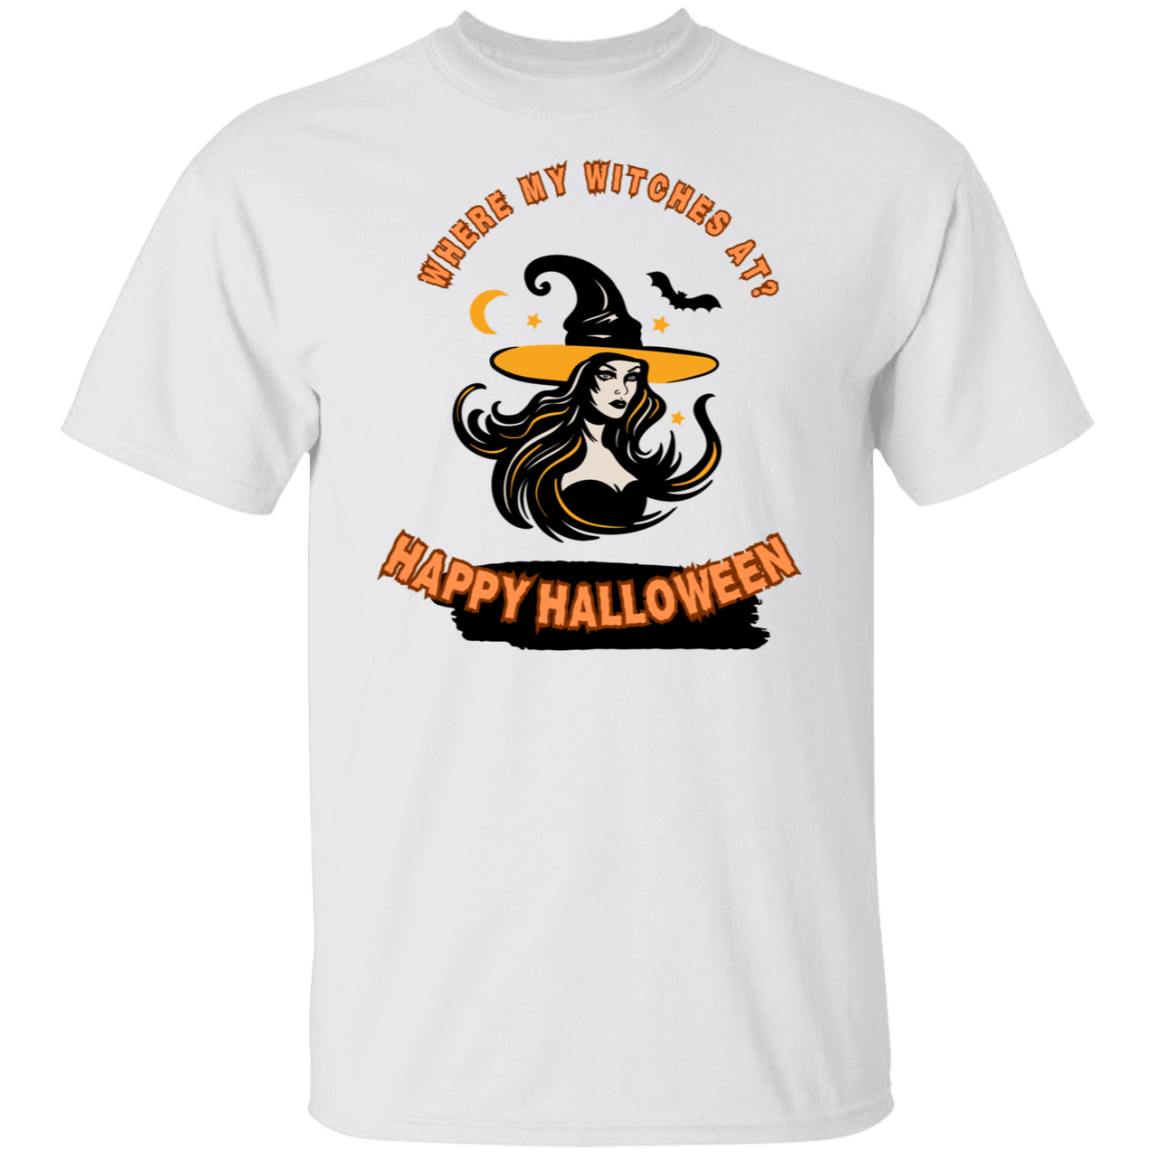 Where my Witches At? T-Shirt